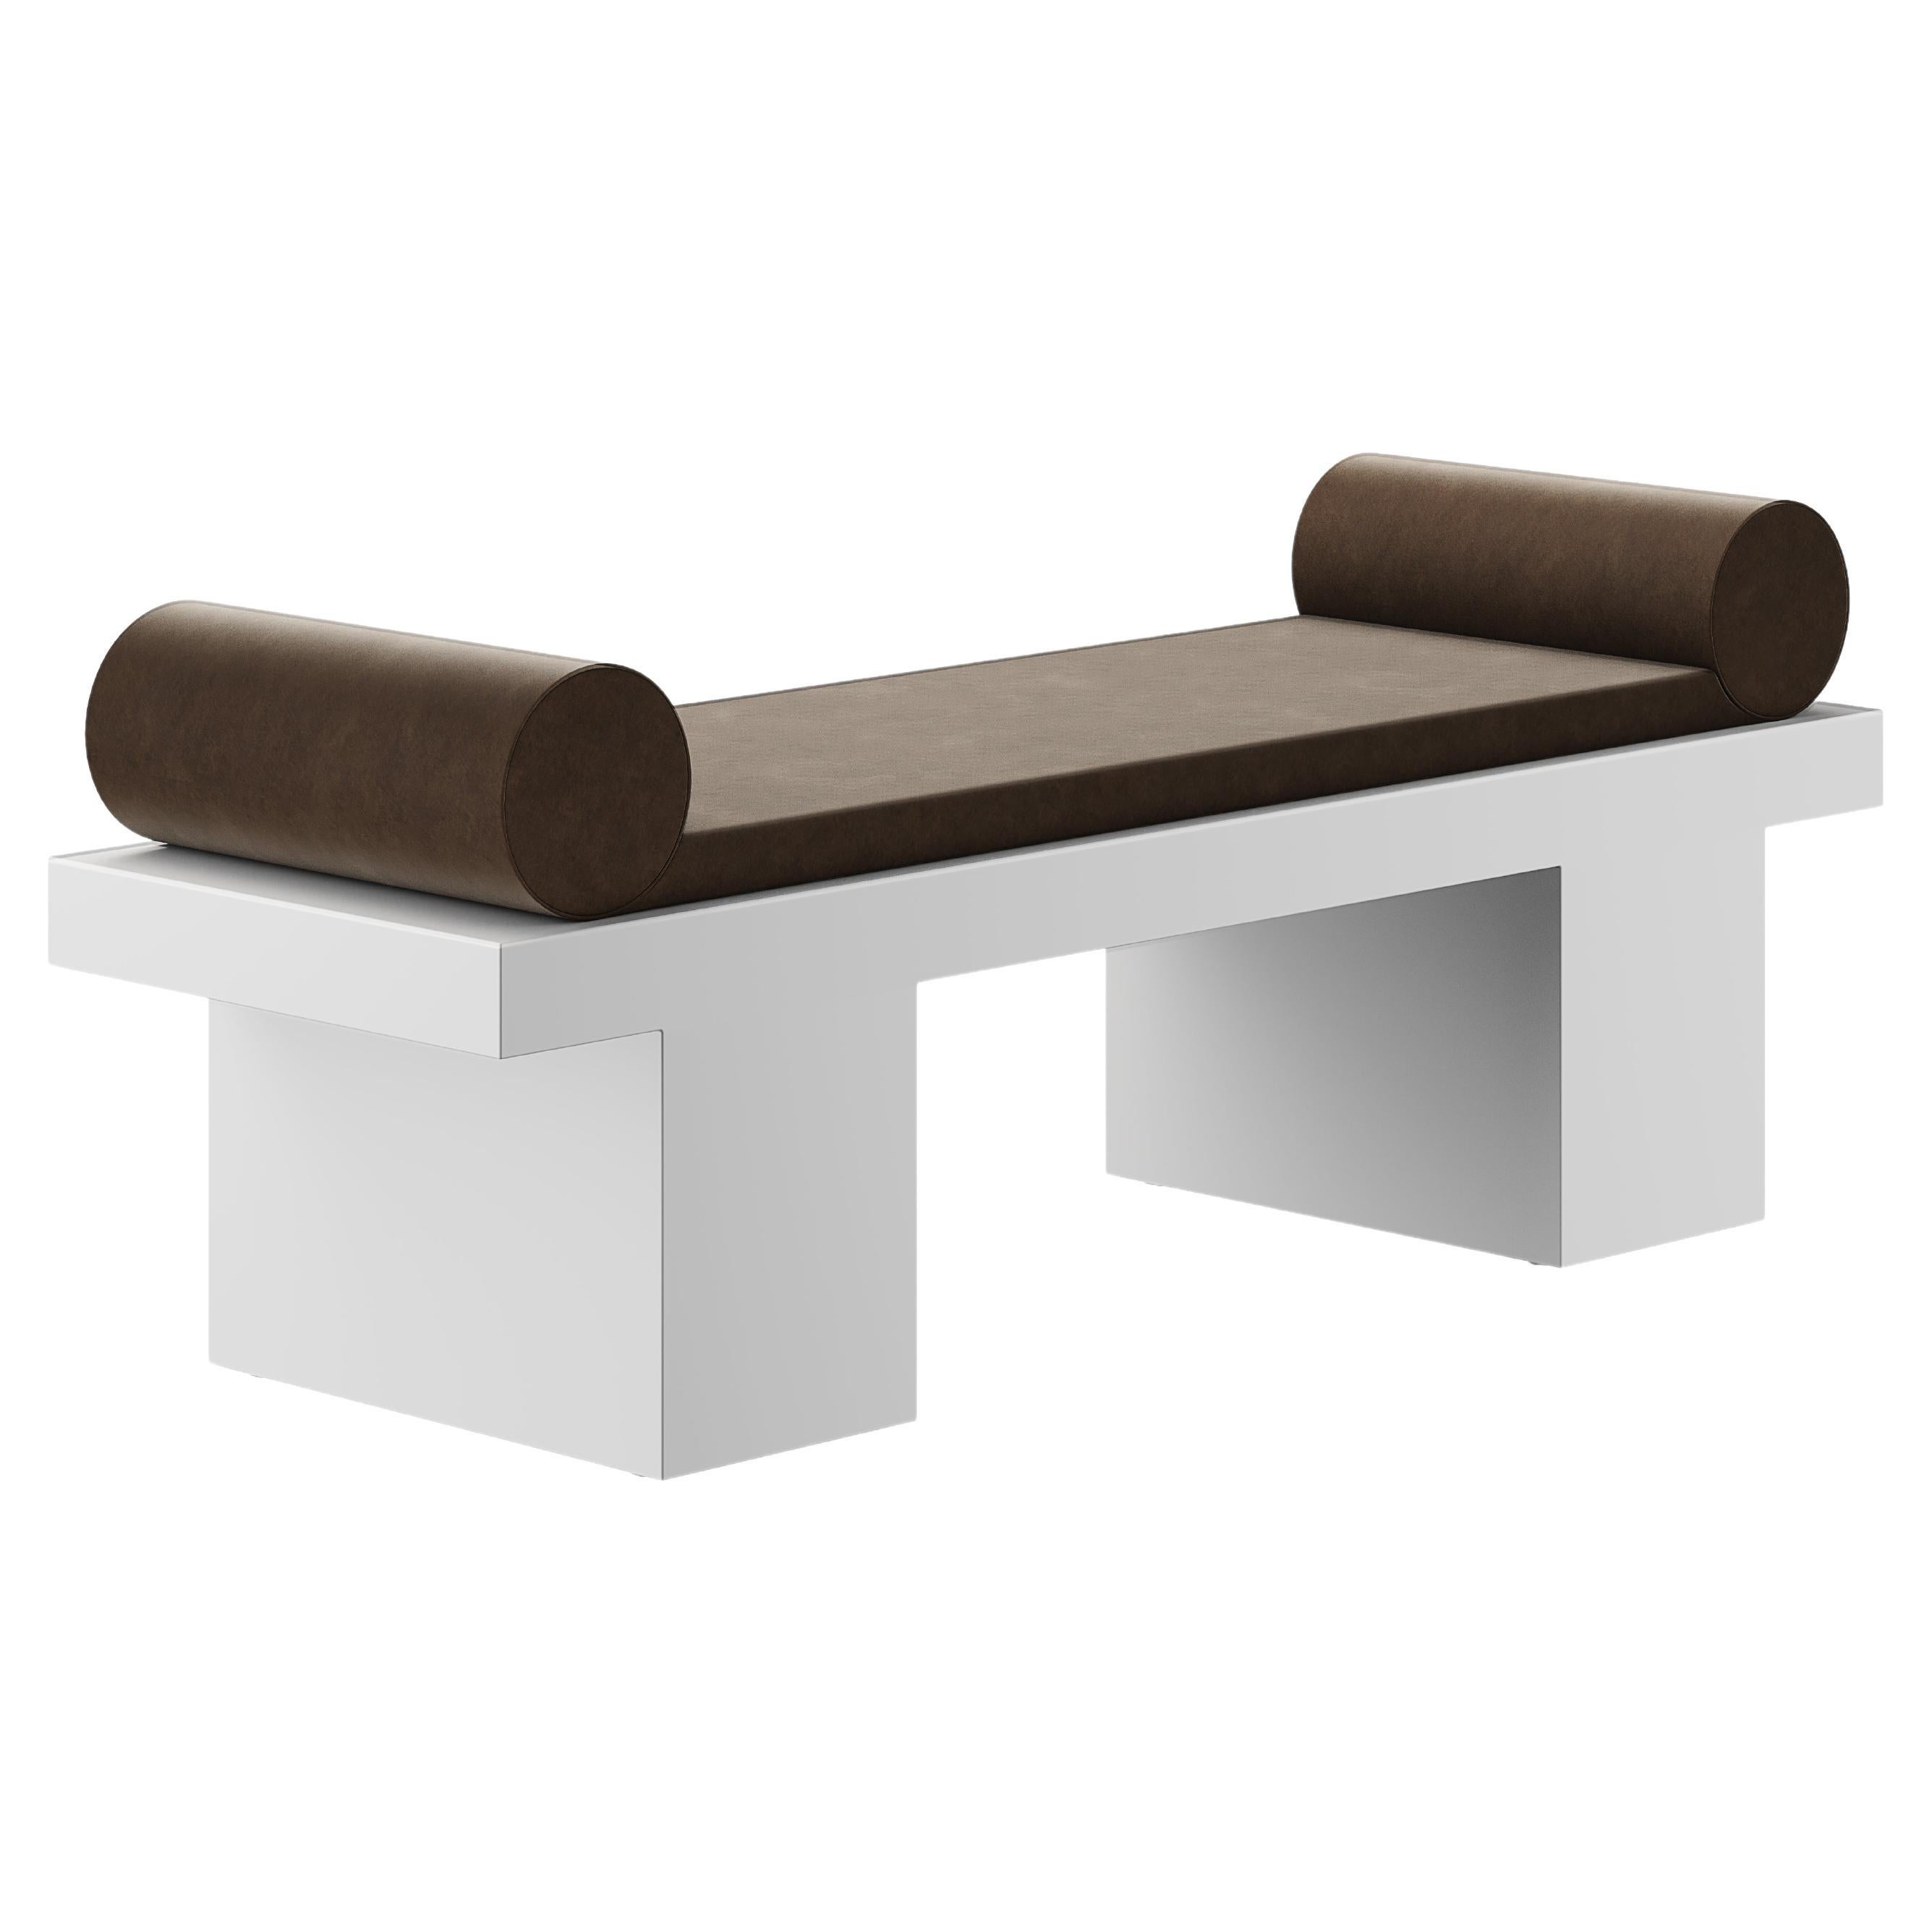 Modern Brutalist Style Bench Grey Matte Lacquer Upholstery in Suede Brown